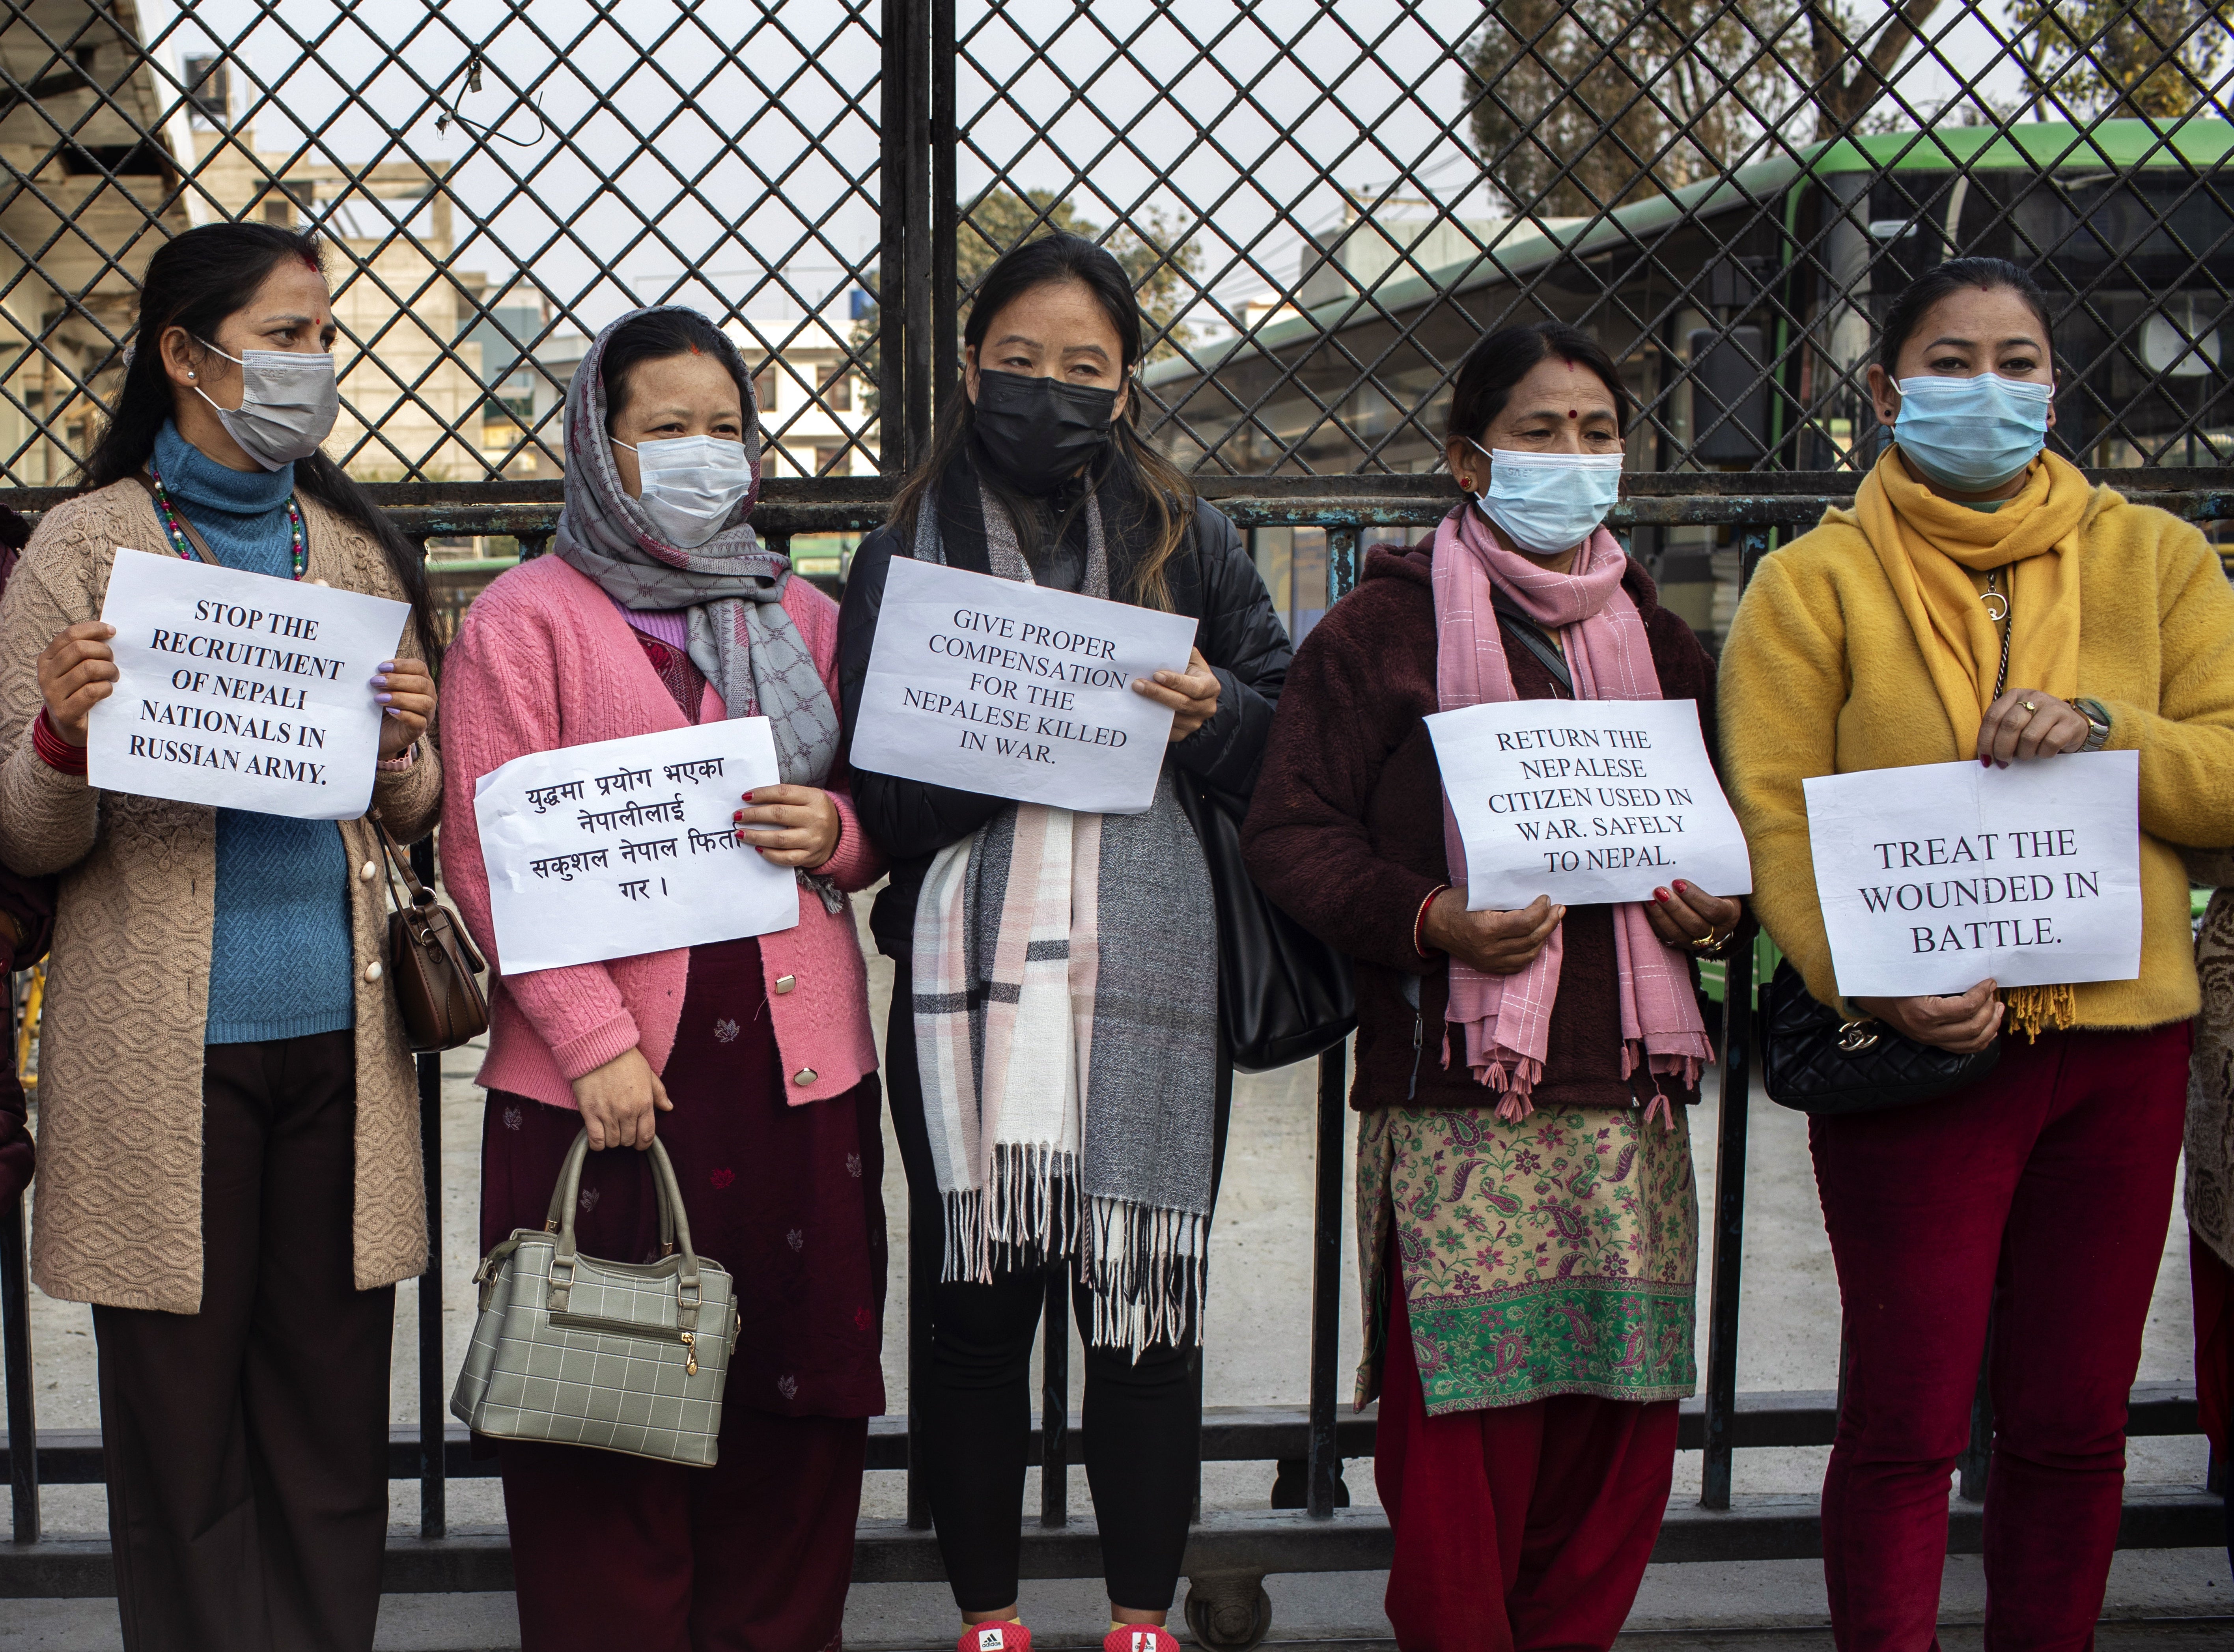 Tina (3-L) and Sita (3-R) at a protest in Kathmandu. Their husbands joined the Russian army four months earlier and are not allowed to return to Nepal before the end of their one-year contract